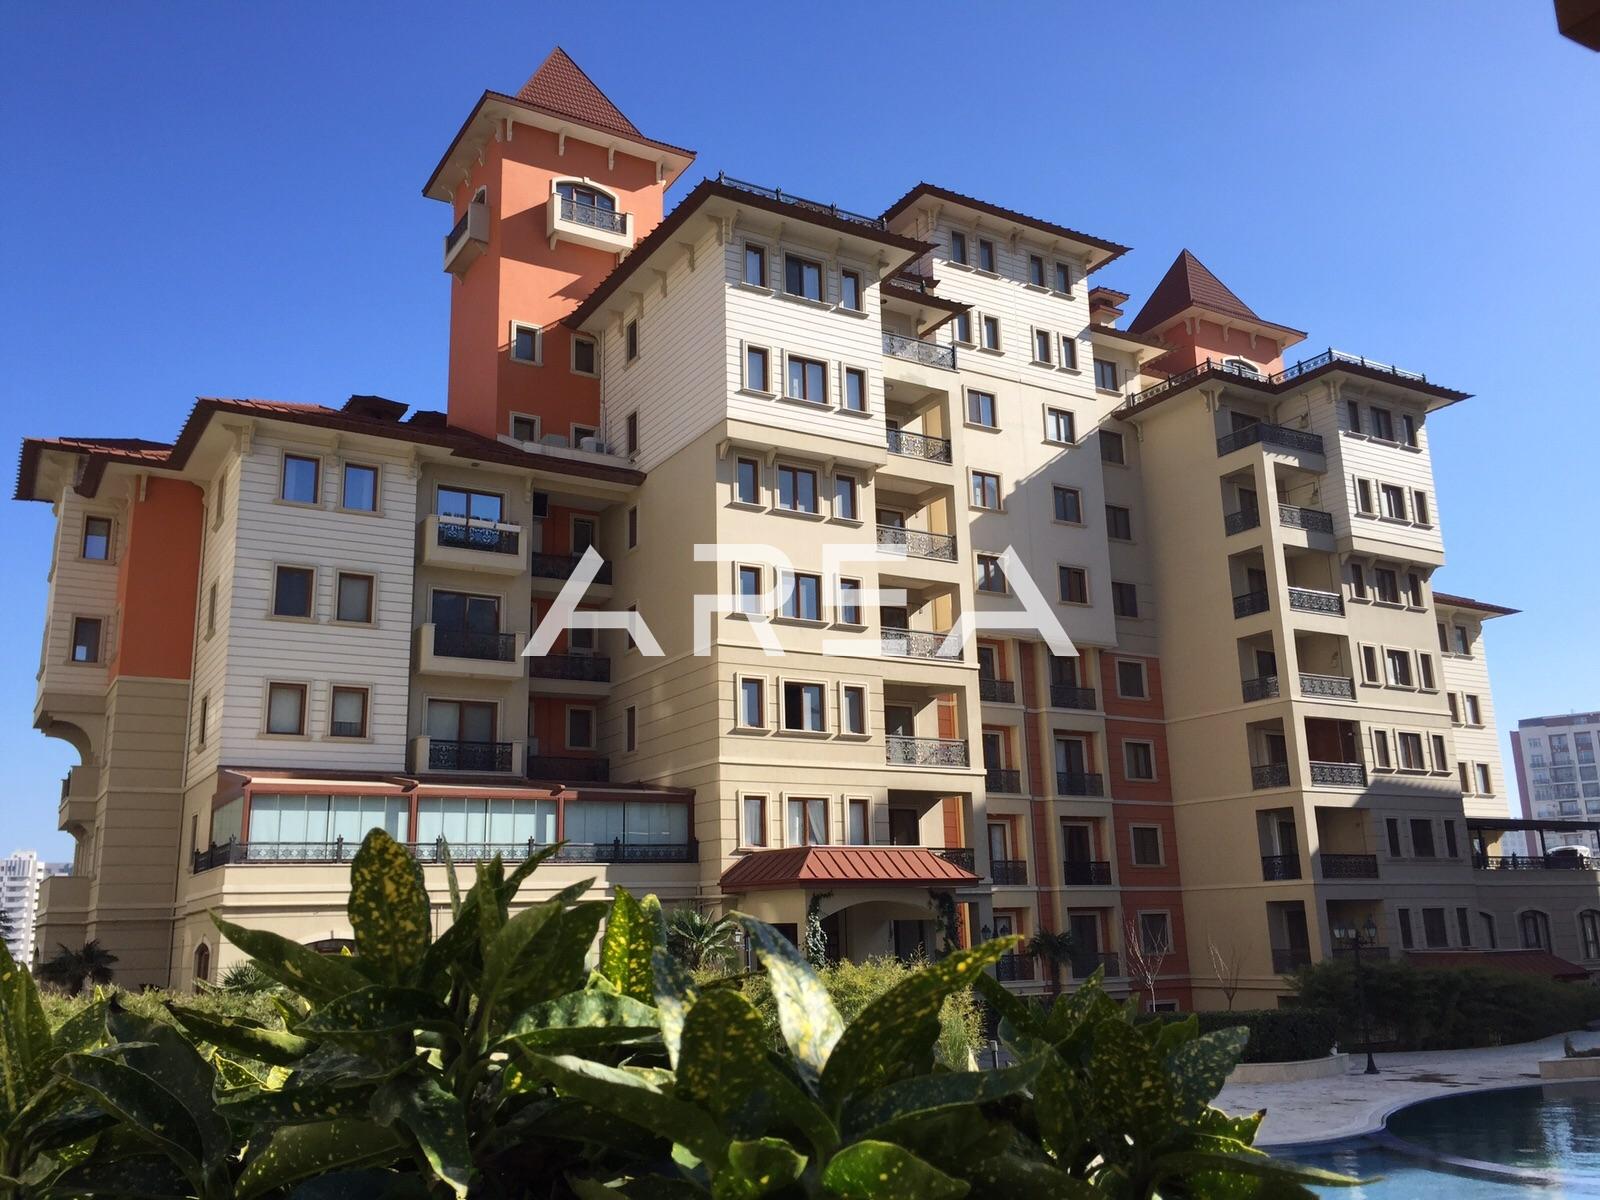 6-bedroom apartment is for sale in 